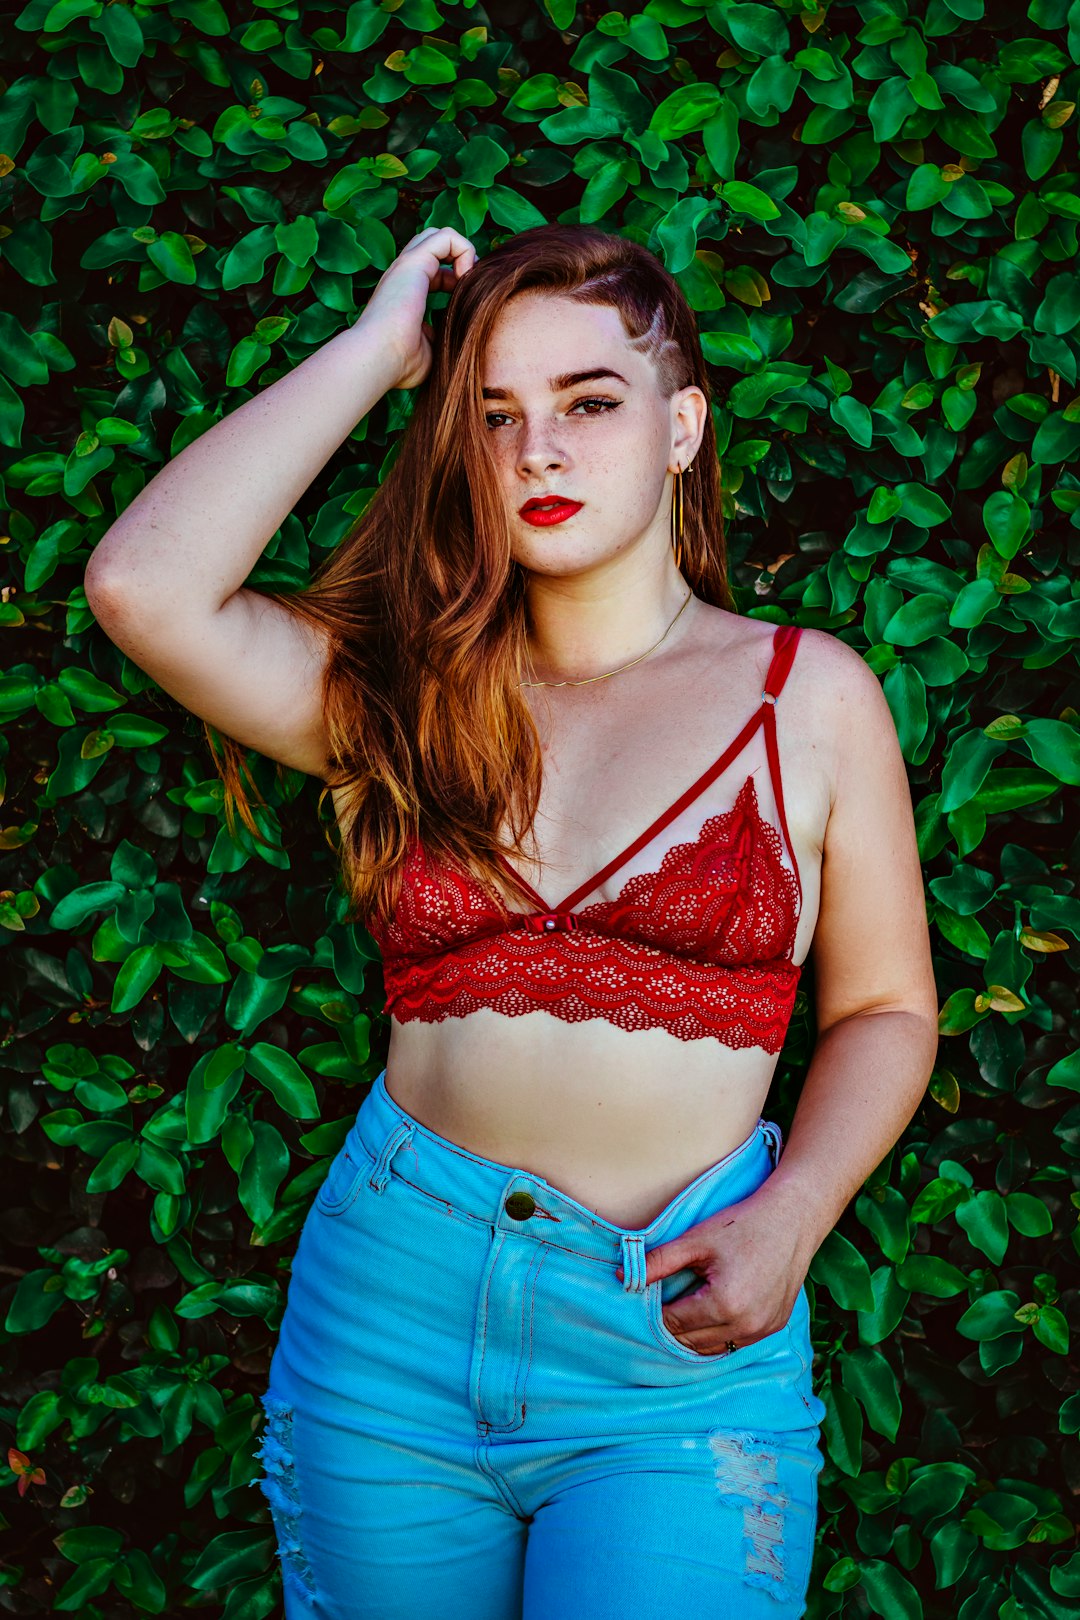 woman in red brassiere and blue denim shorts standing beside green plants